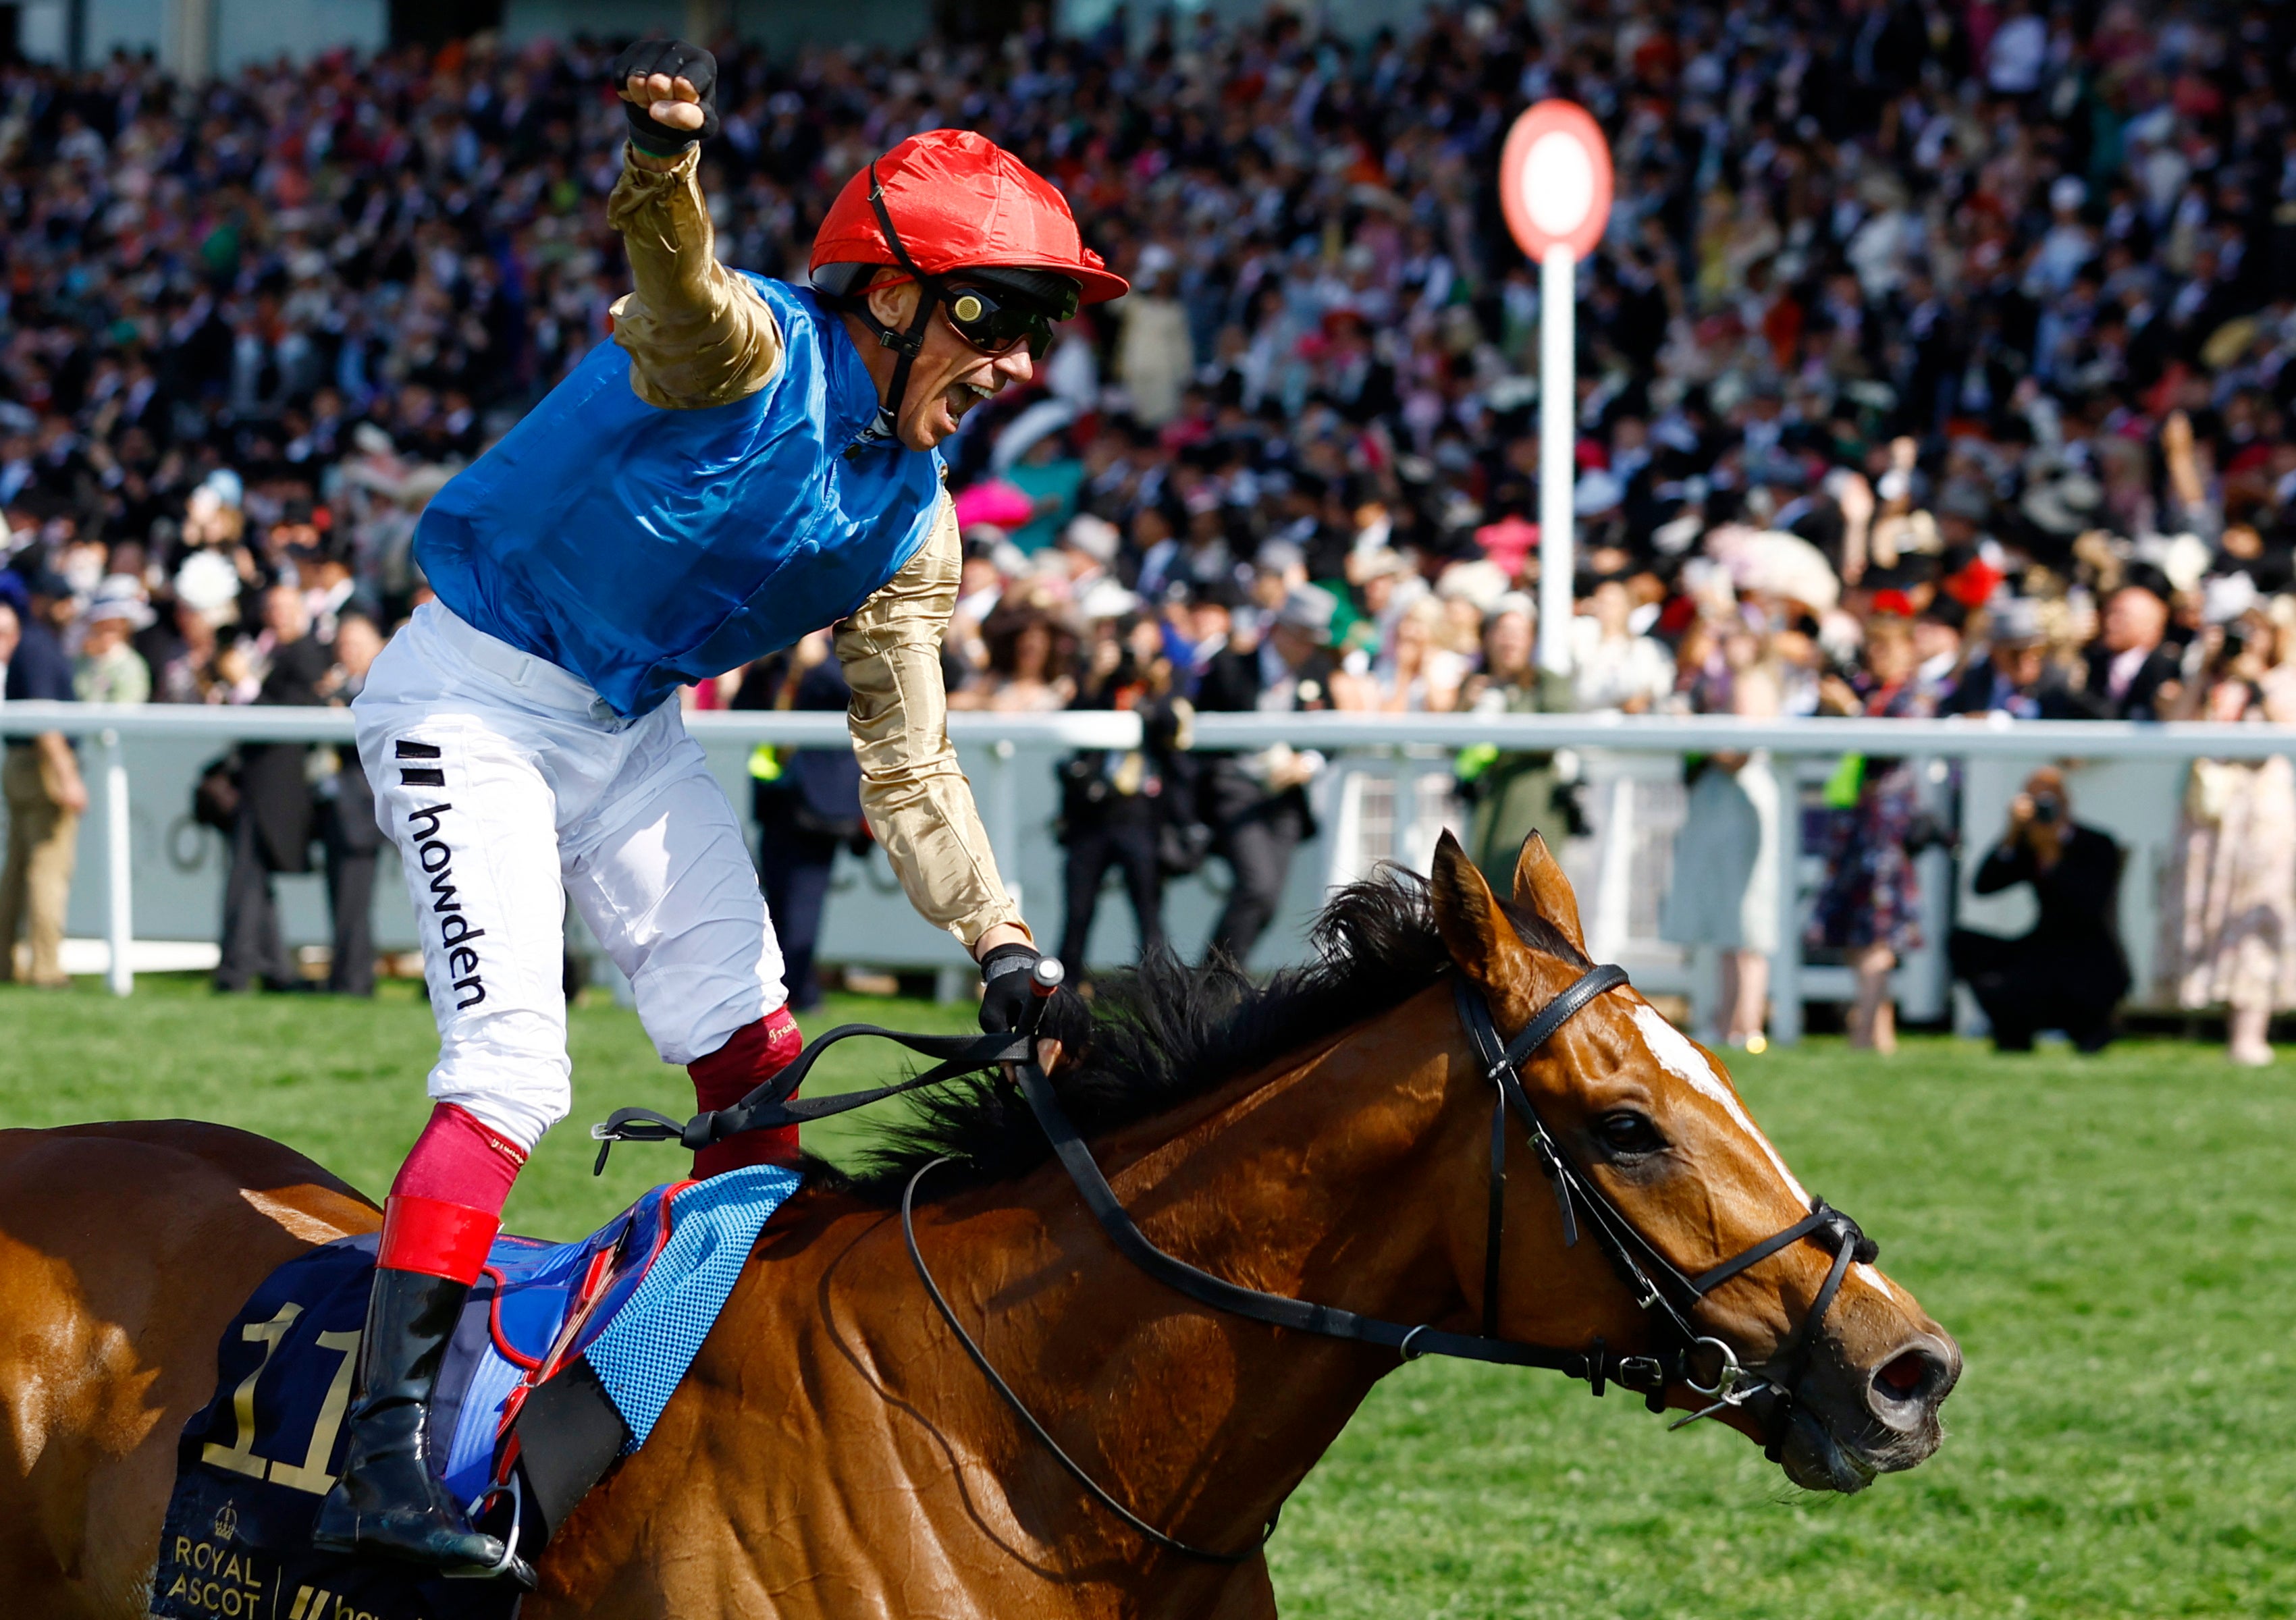 Frankie Dettori riding Courage Mon Ami celebrates after winning the gold cup